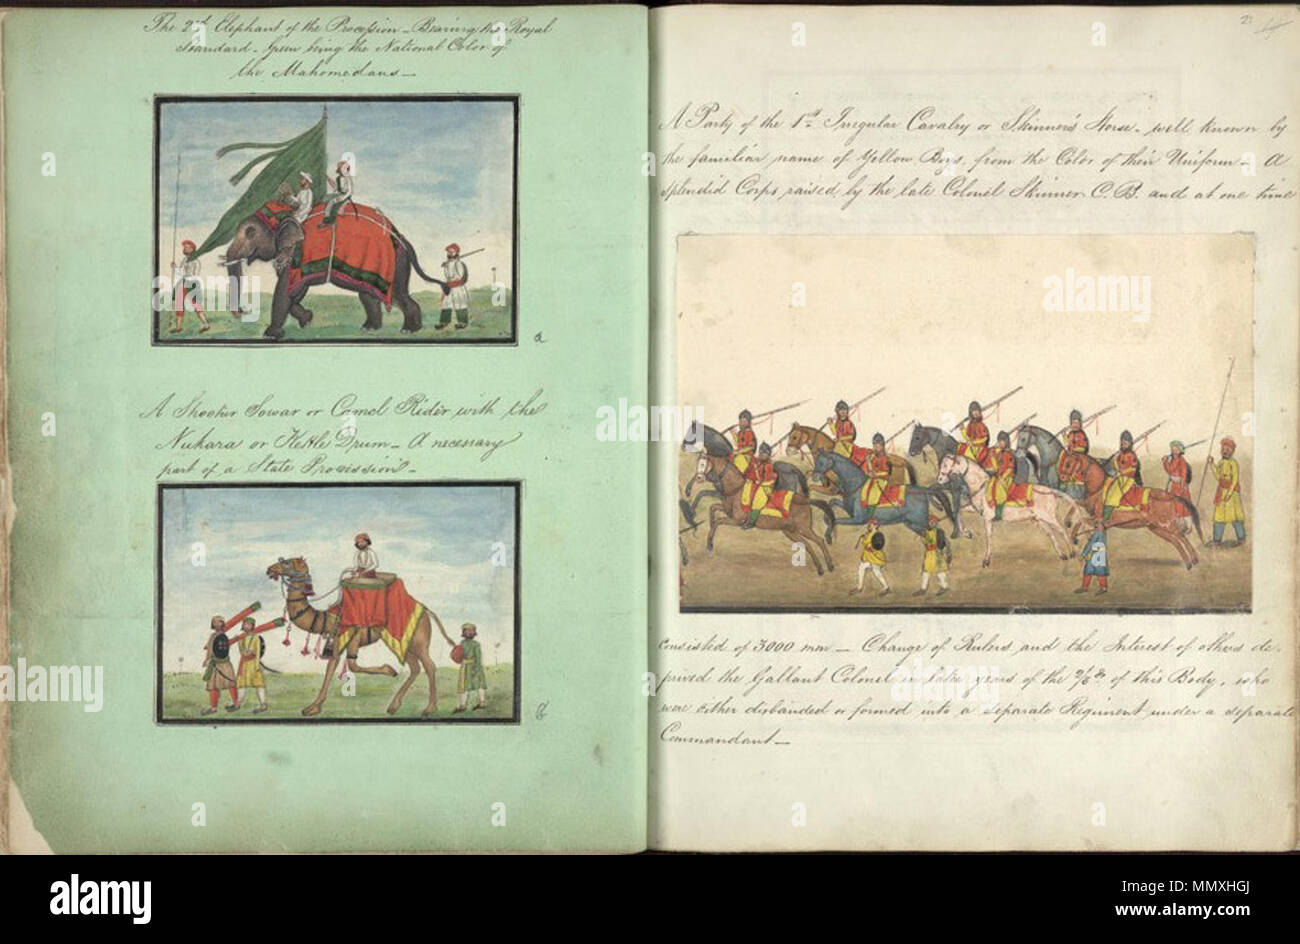 Folio from 'Reminiscences of Imperial Delhi’, an album by Thomas Metcalfe, 1843 Stock Photo